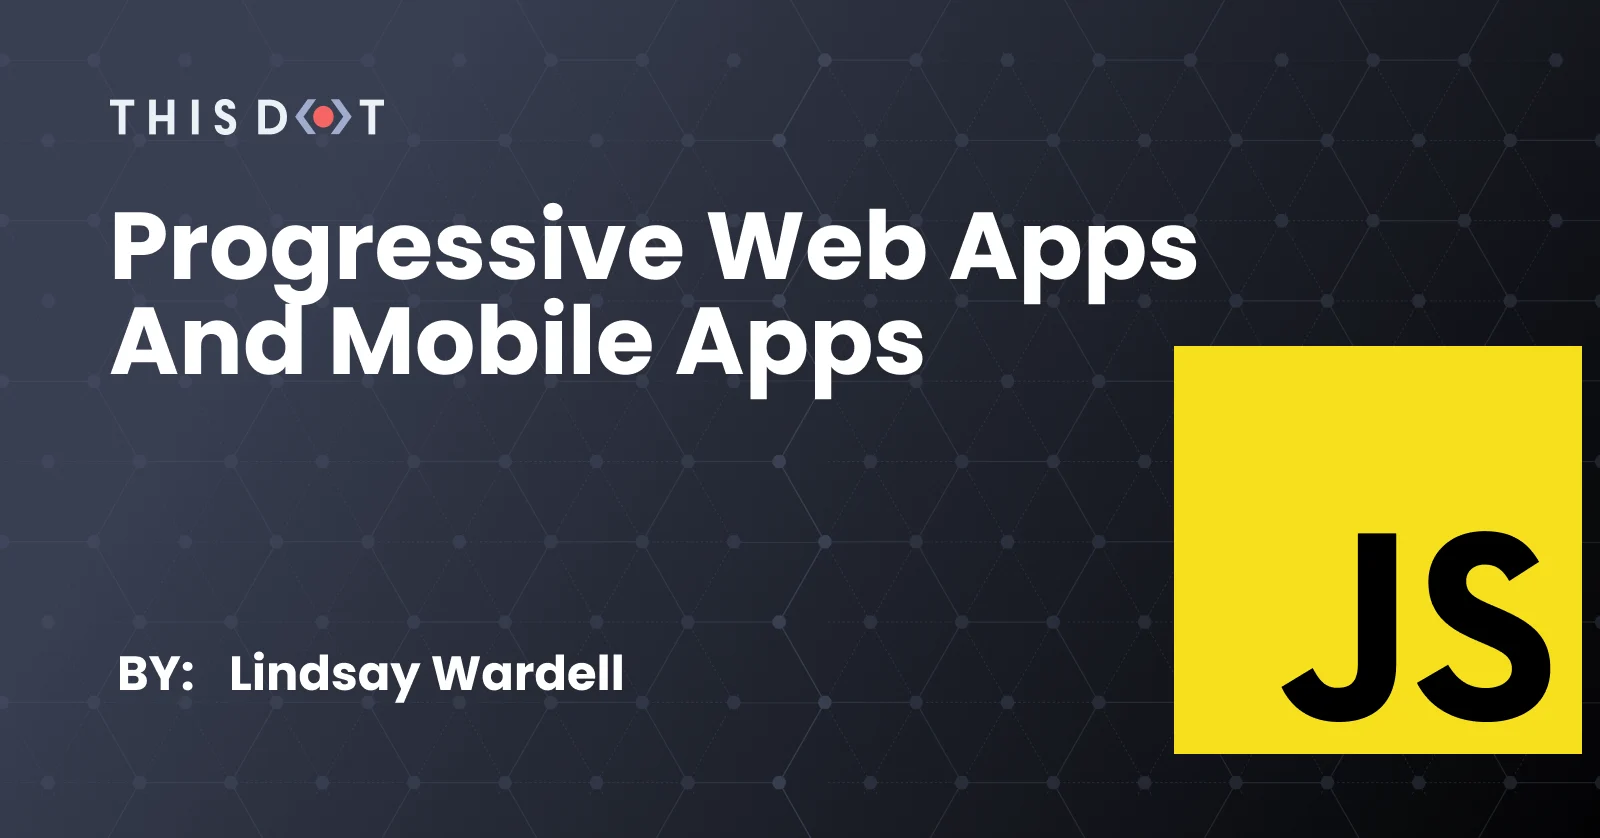 Progressive Web Apps and Mobile Apps cover image